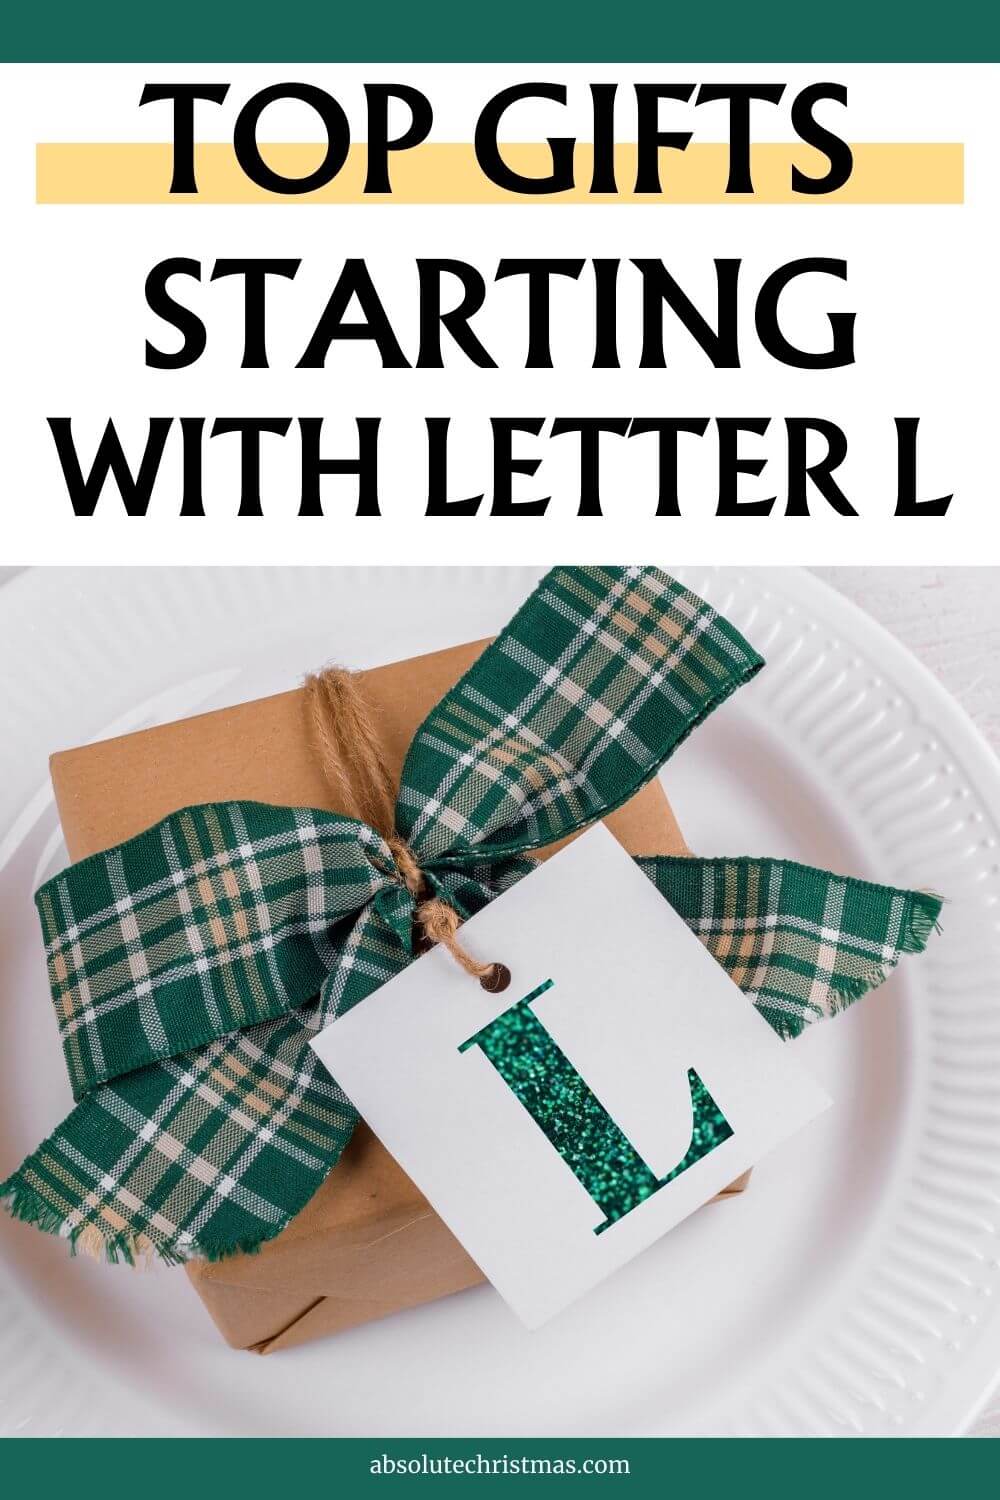 Top Gifts Starting With Letter L